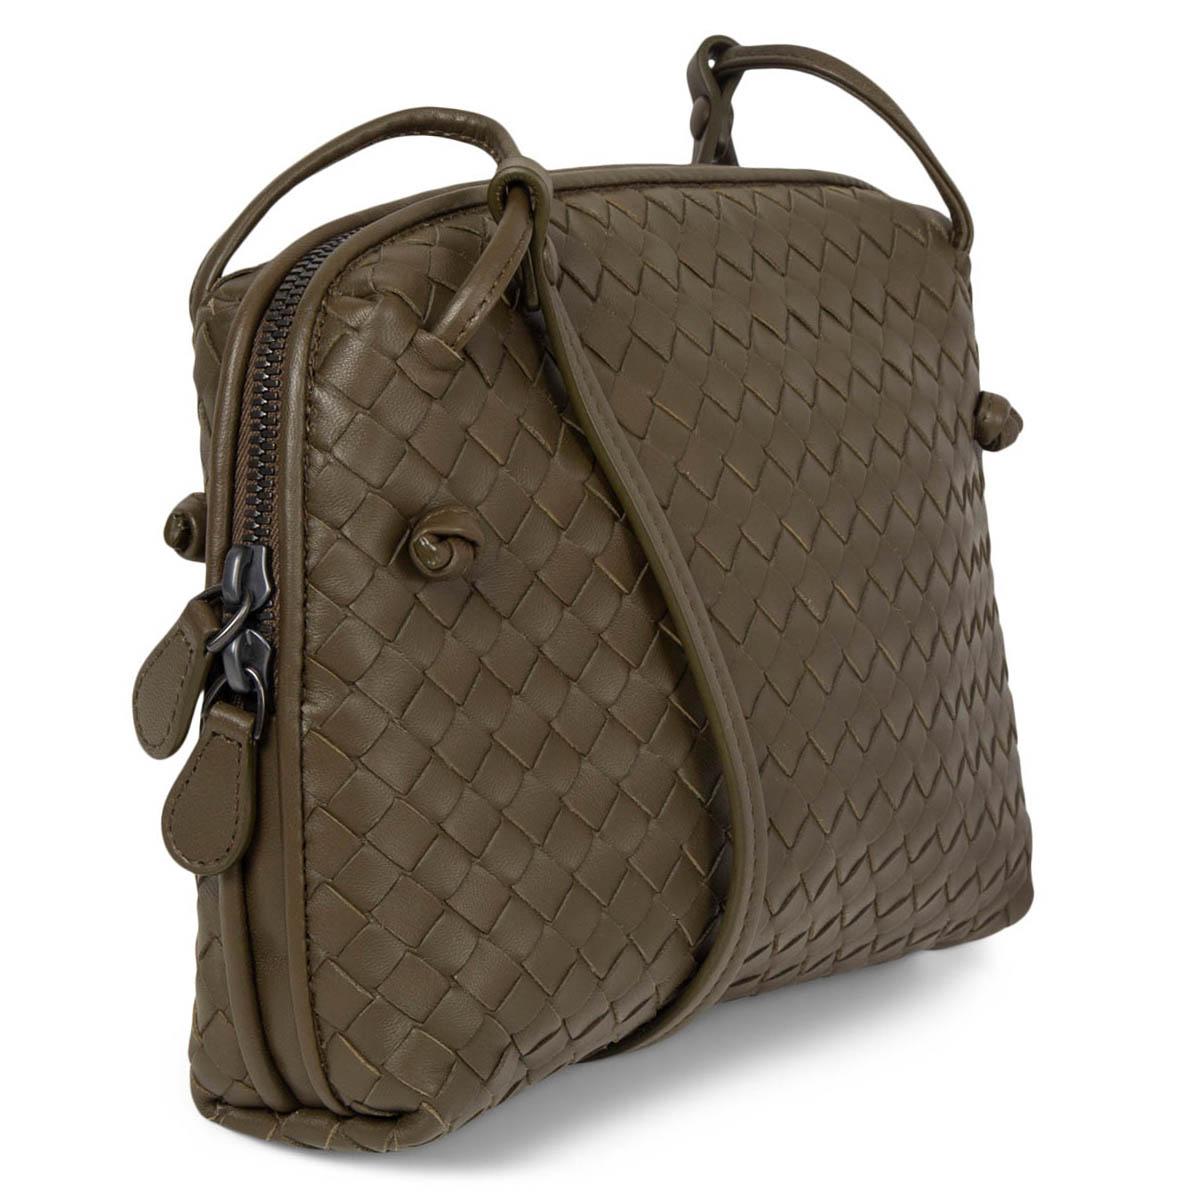 100% authentic Bottega Veneta Nodini Small crossbody bag in olive green Intrecciato lambskin. Opens with a double zipper on top and is lined in dark taupe suede with one zipper pocket against the back and a slip pocket against the front. Brand new.